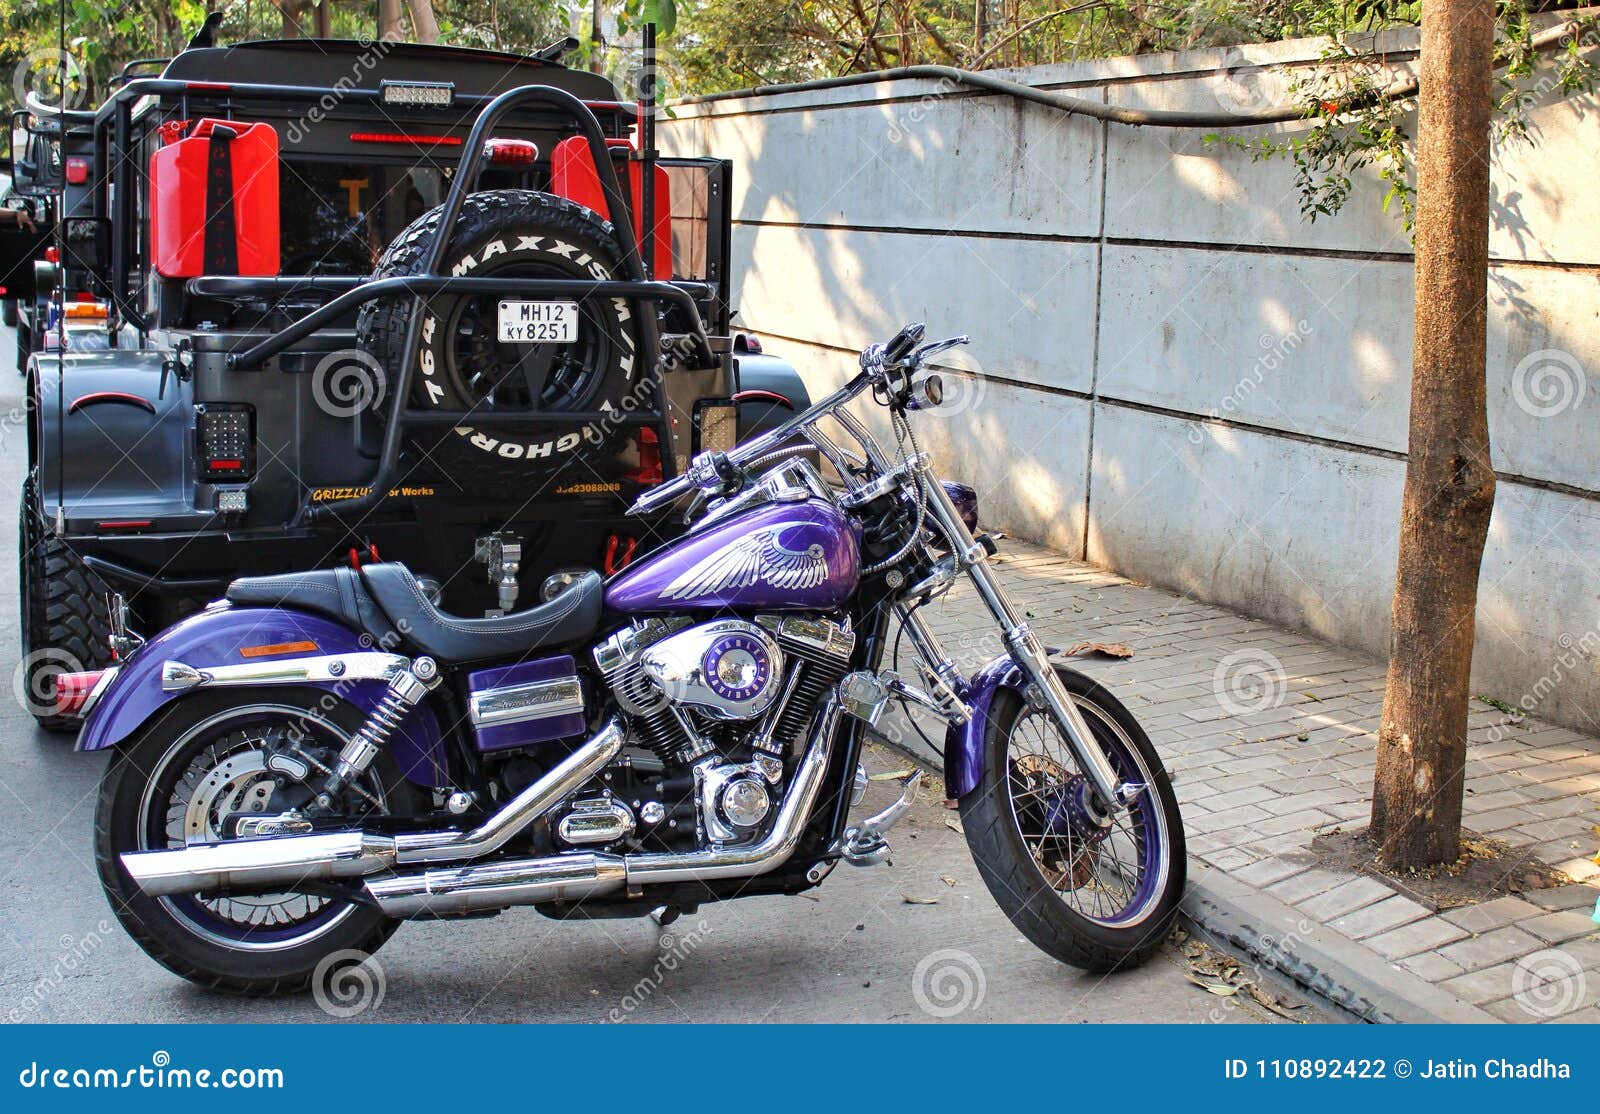 Harley Davidson Super Glide Motorcycle In India Editorial Photography Image Of Heats Love 110892422